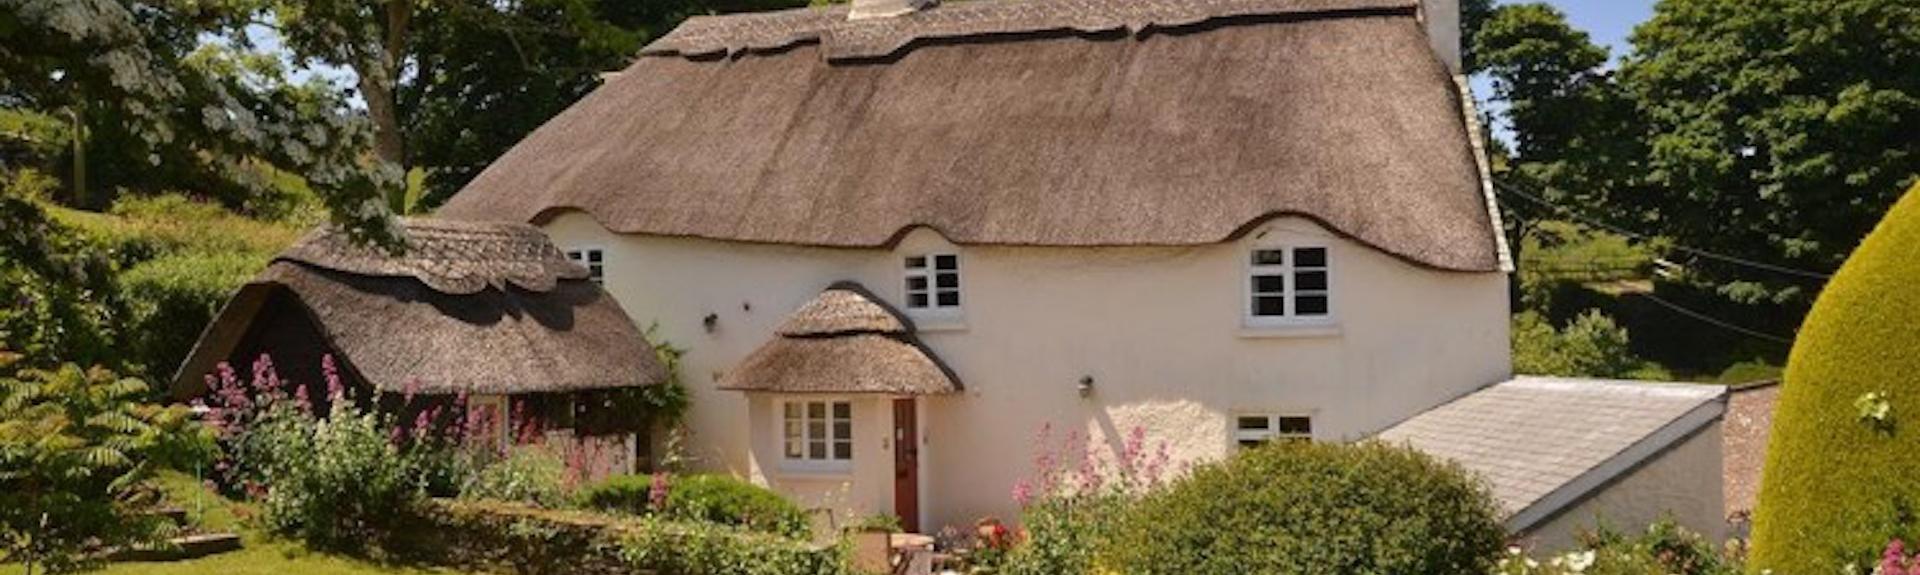 Large thatched cottage overlooking a large lawn fringed with flowering shrubs.